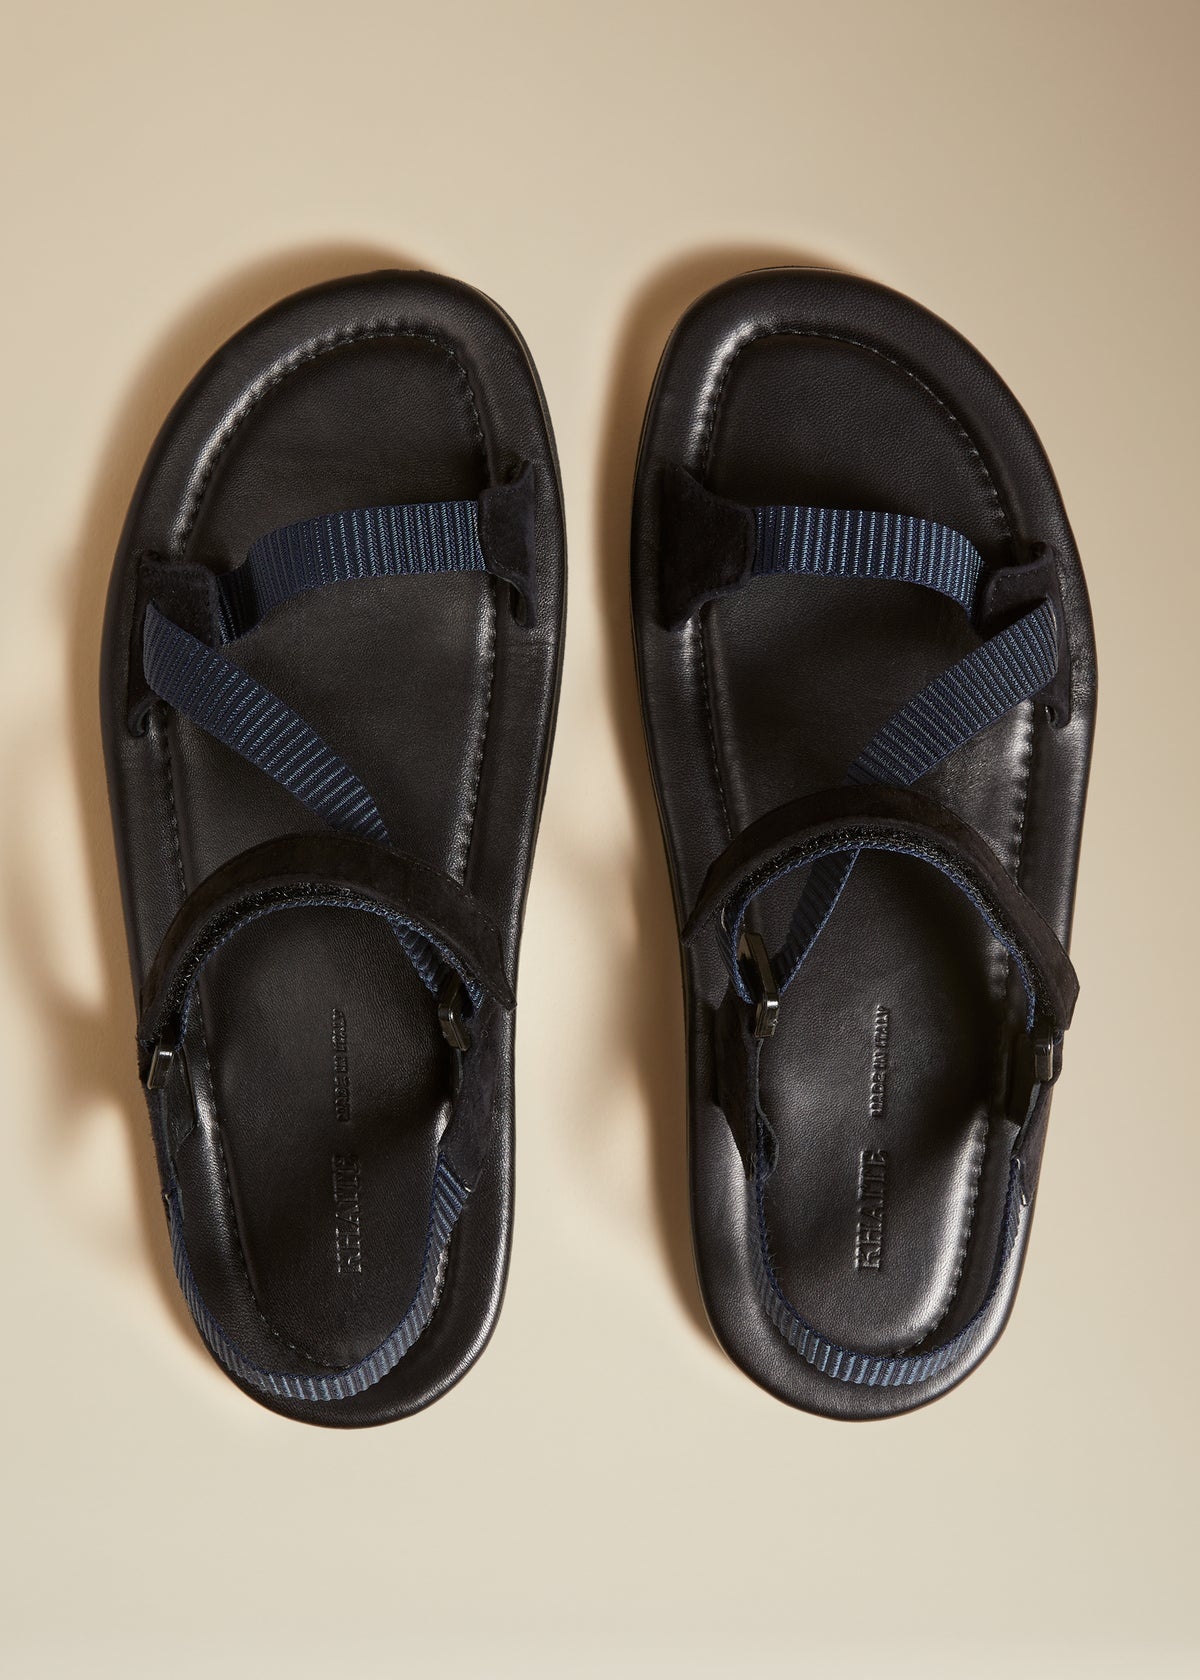 The Hacker Sandal in Navy and Black - 3